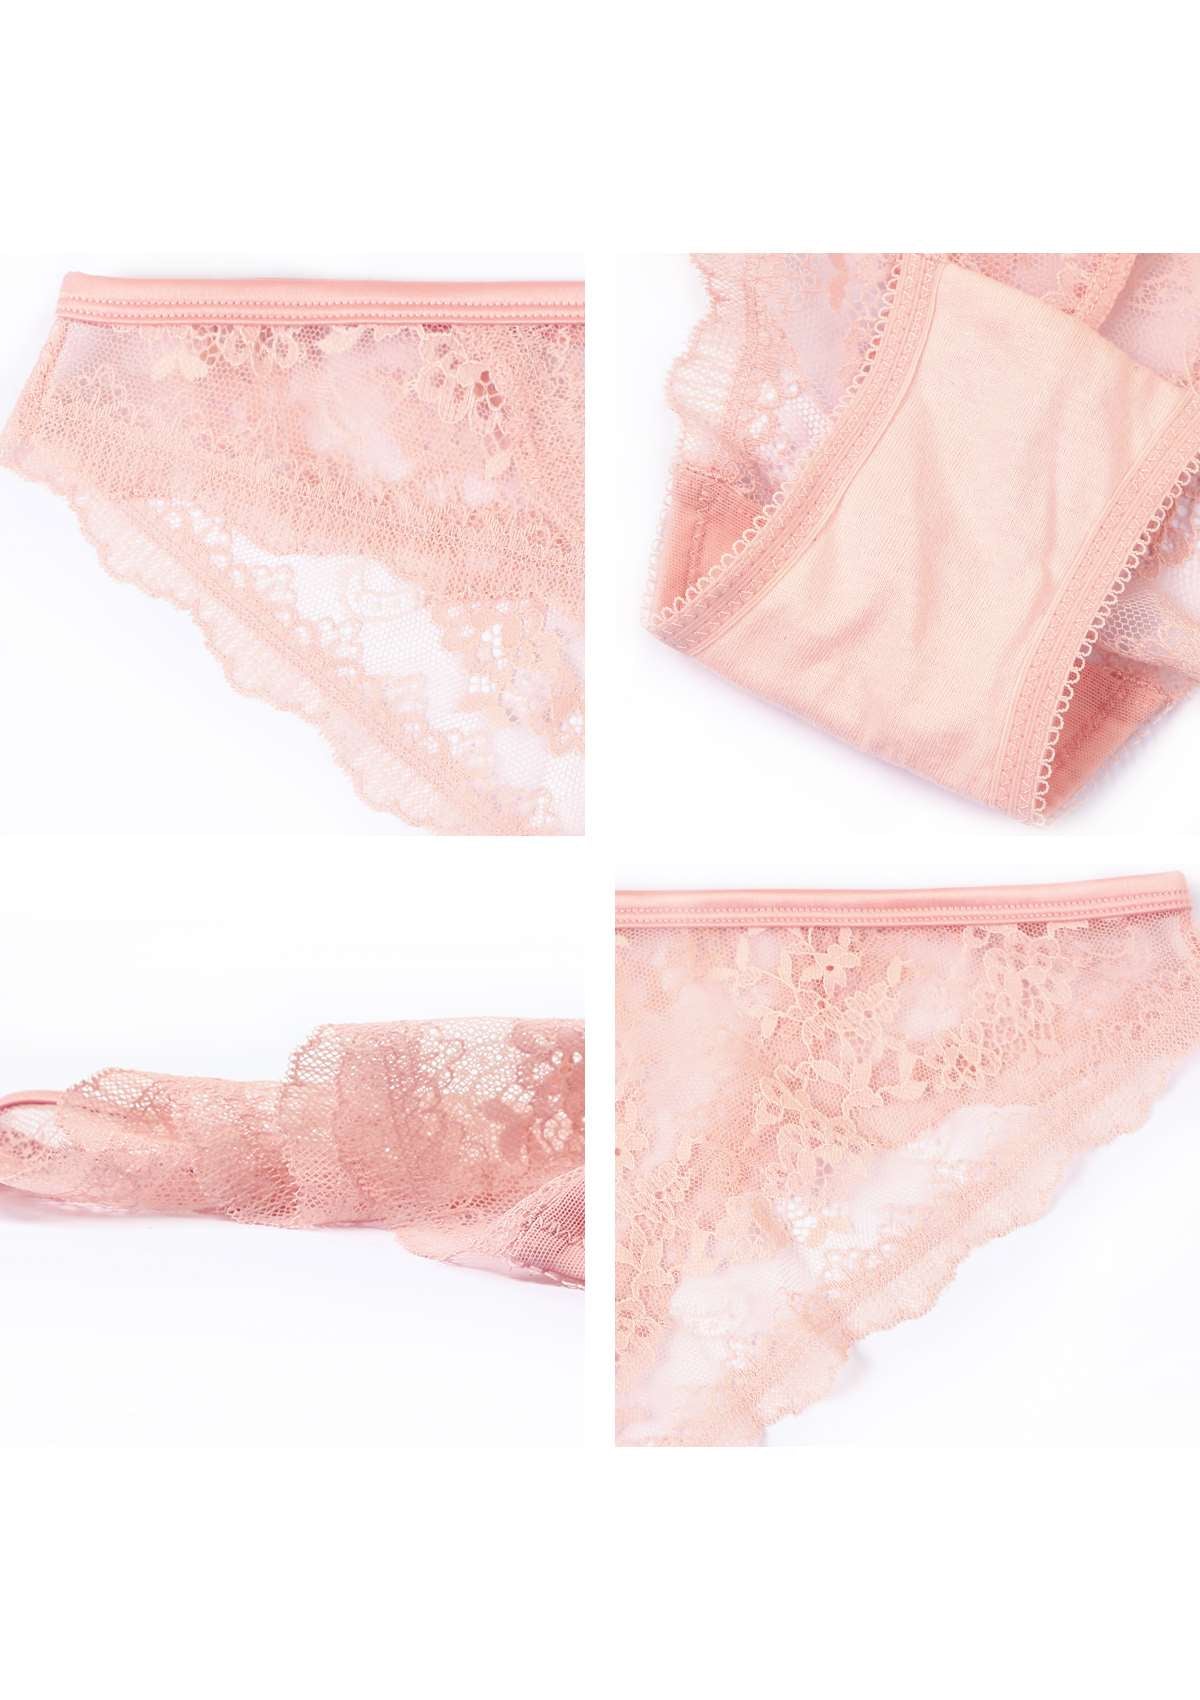 HSIA Floral Bridal Lace Back Cheeky Delicate Underwear  - Pink / M